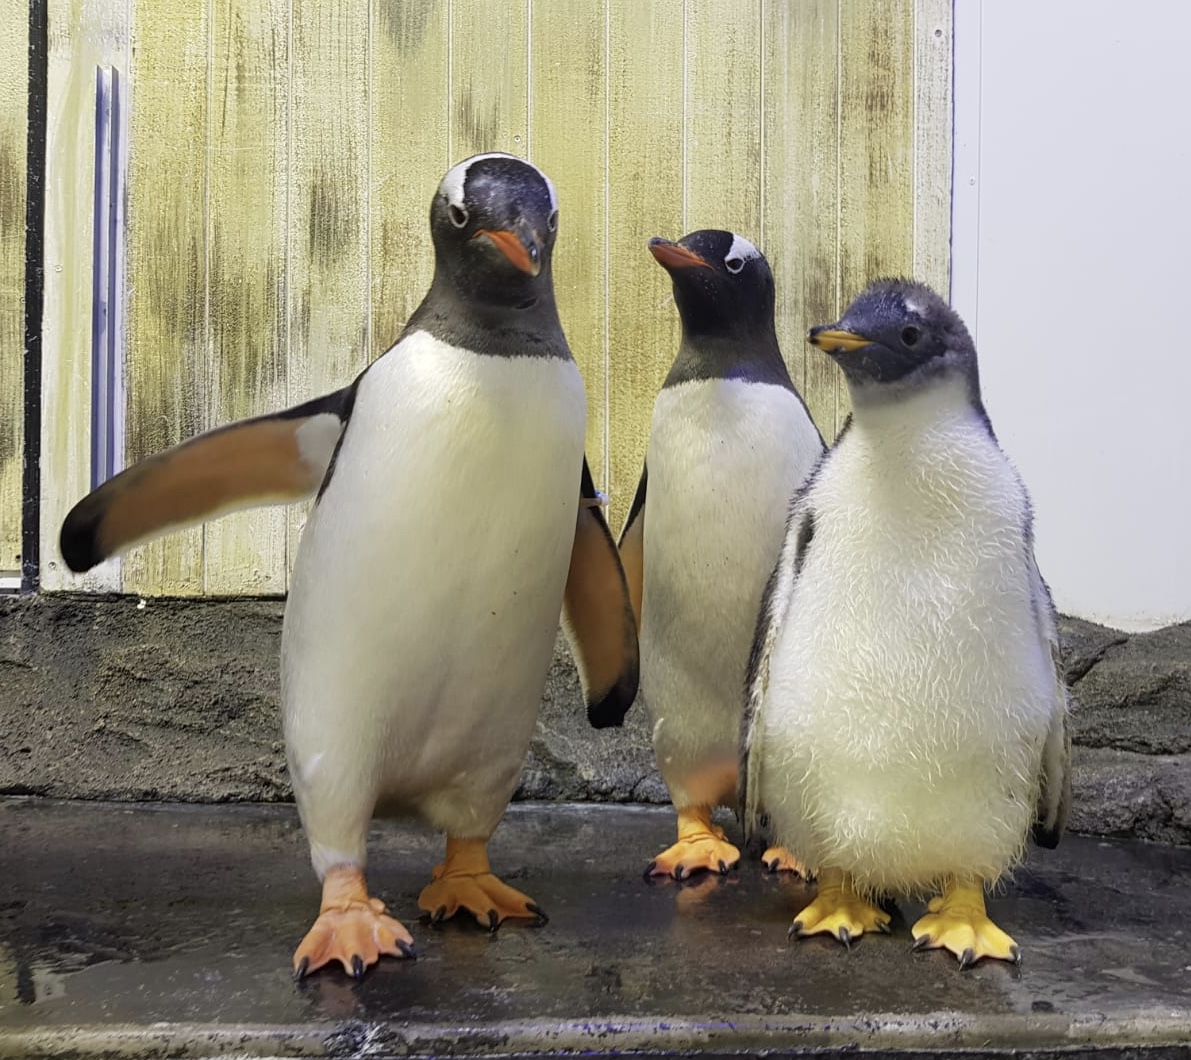 Sydney’s Gay Penguin Power Couple Get Their Own Show (Sort Of)